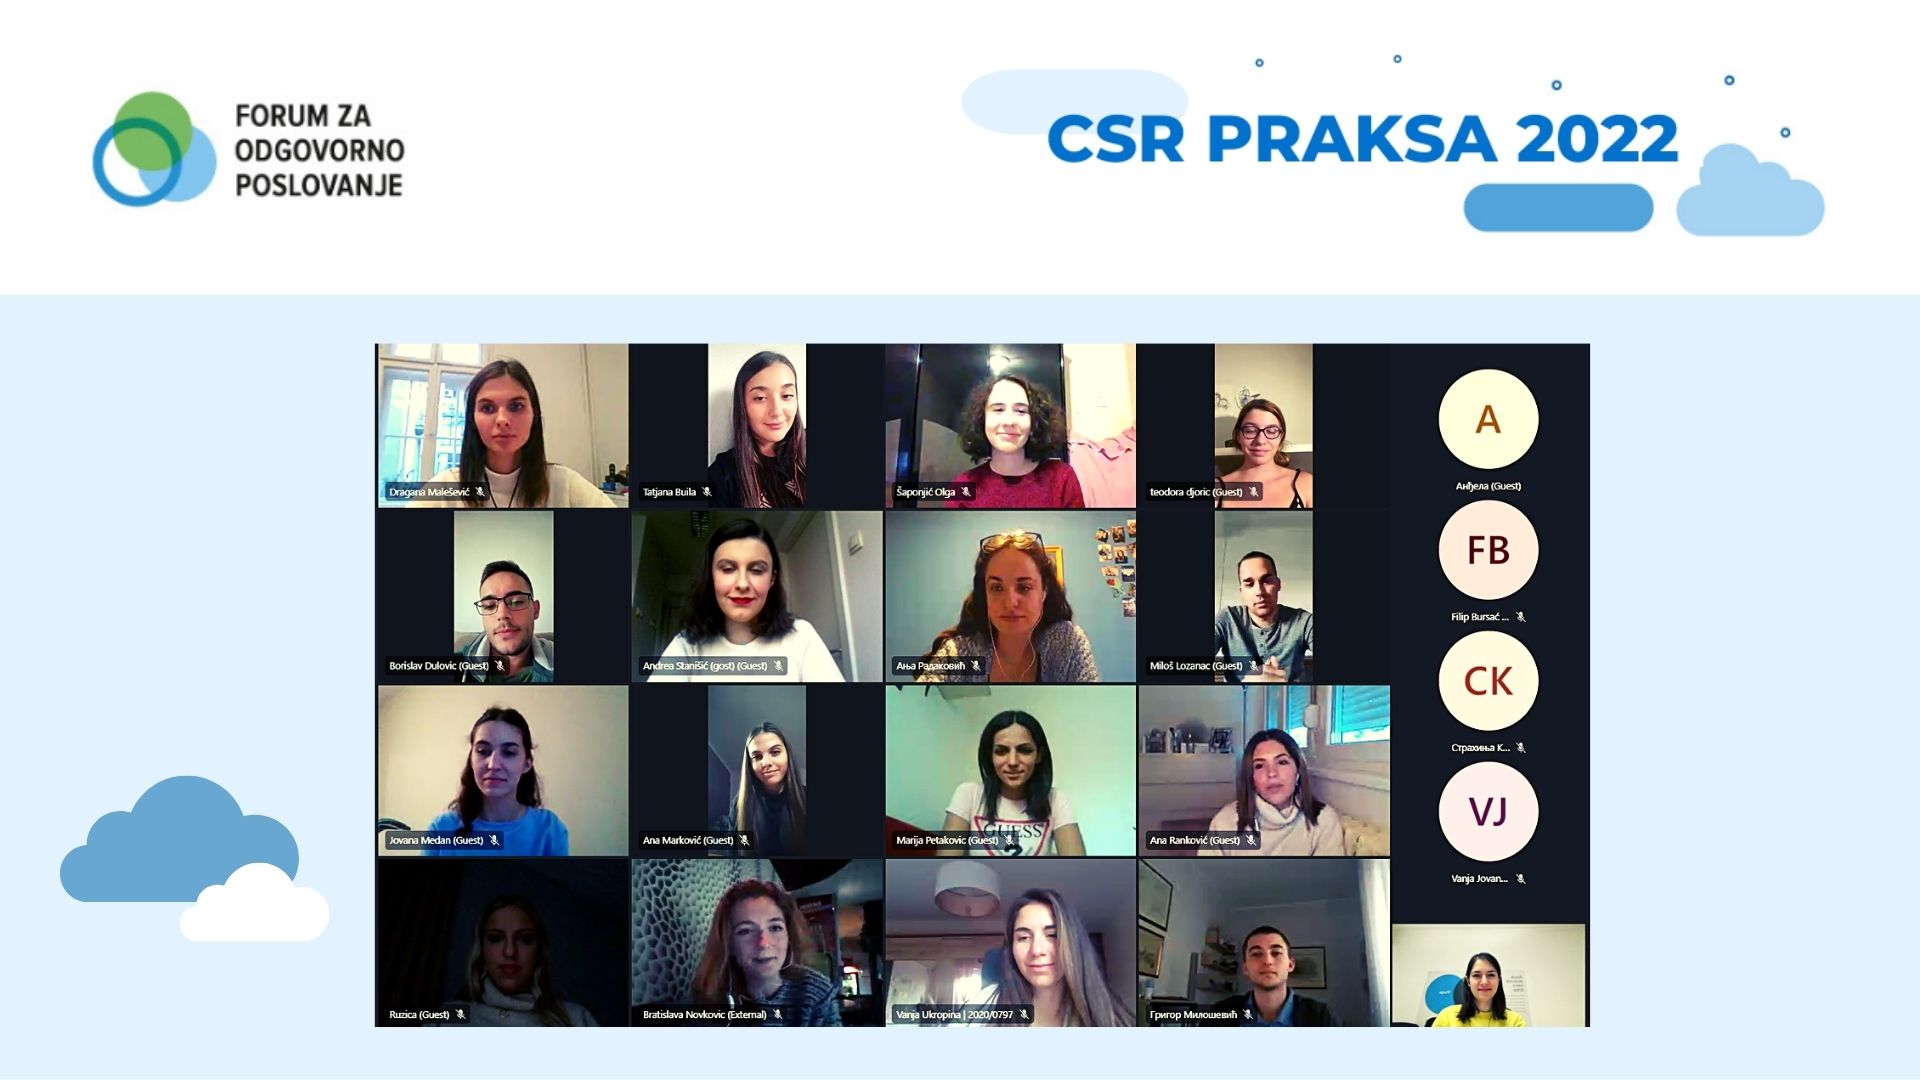 The 3rd Generation of Young People Completed the “CSR Practice” Educational Program